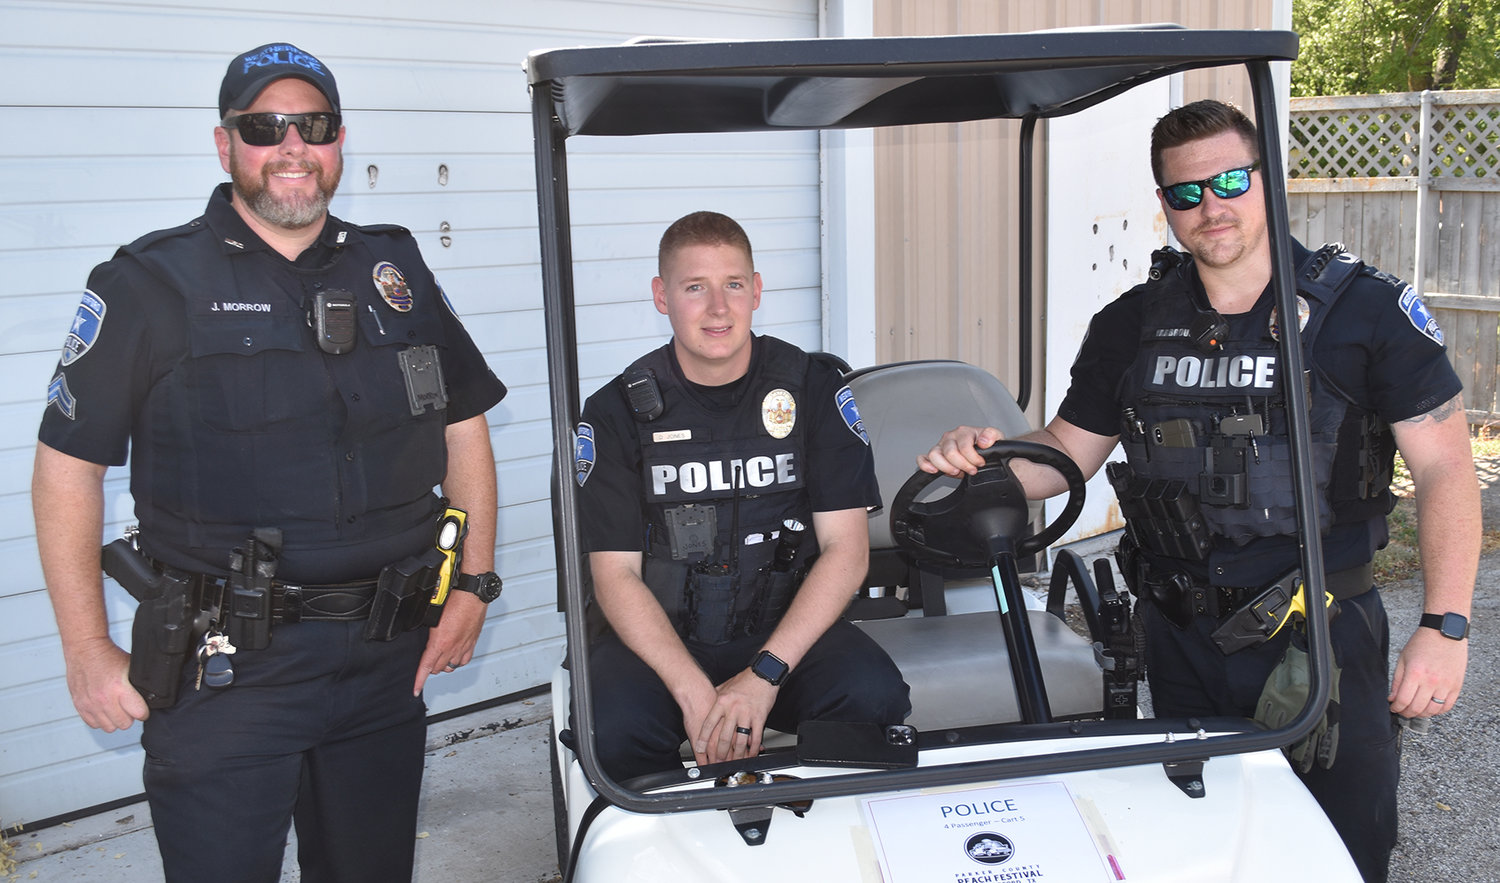 Corporal Morrow and Officers Jones and Yarbrough were among the members of Weatherford Police Dept. providing law enforcement services.